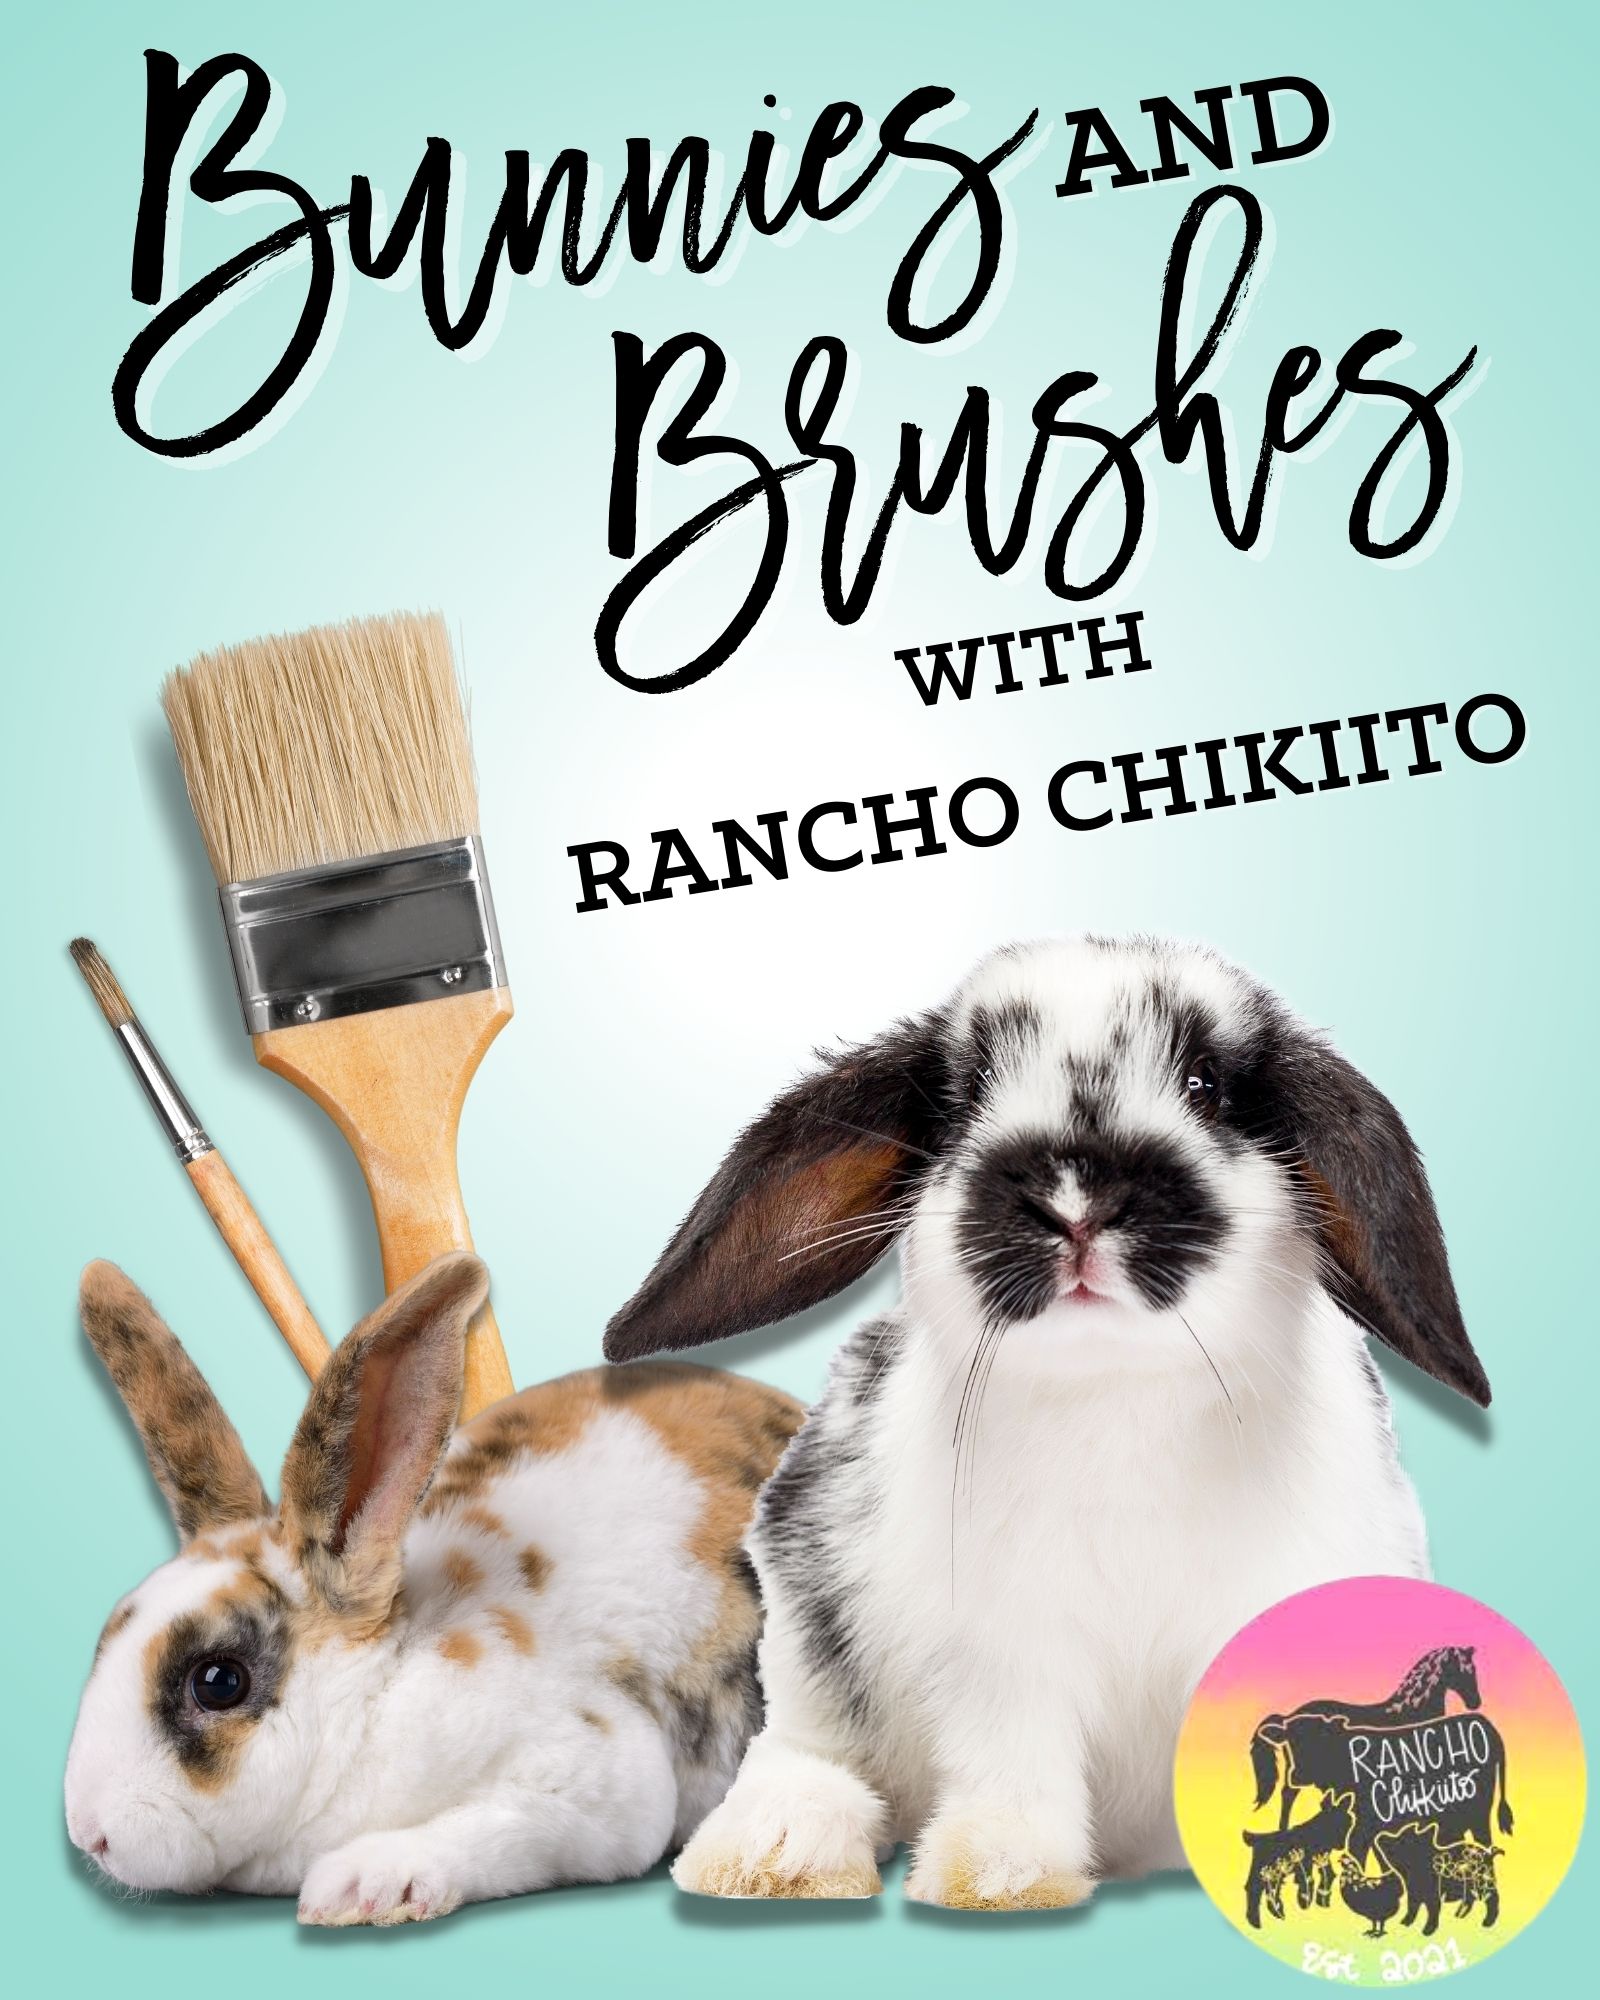 Bunnies and Brushes! With Rancho Chikiito